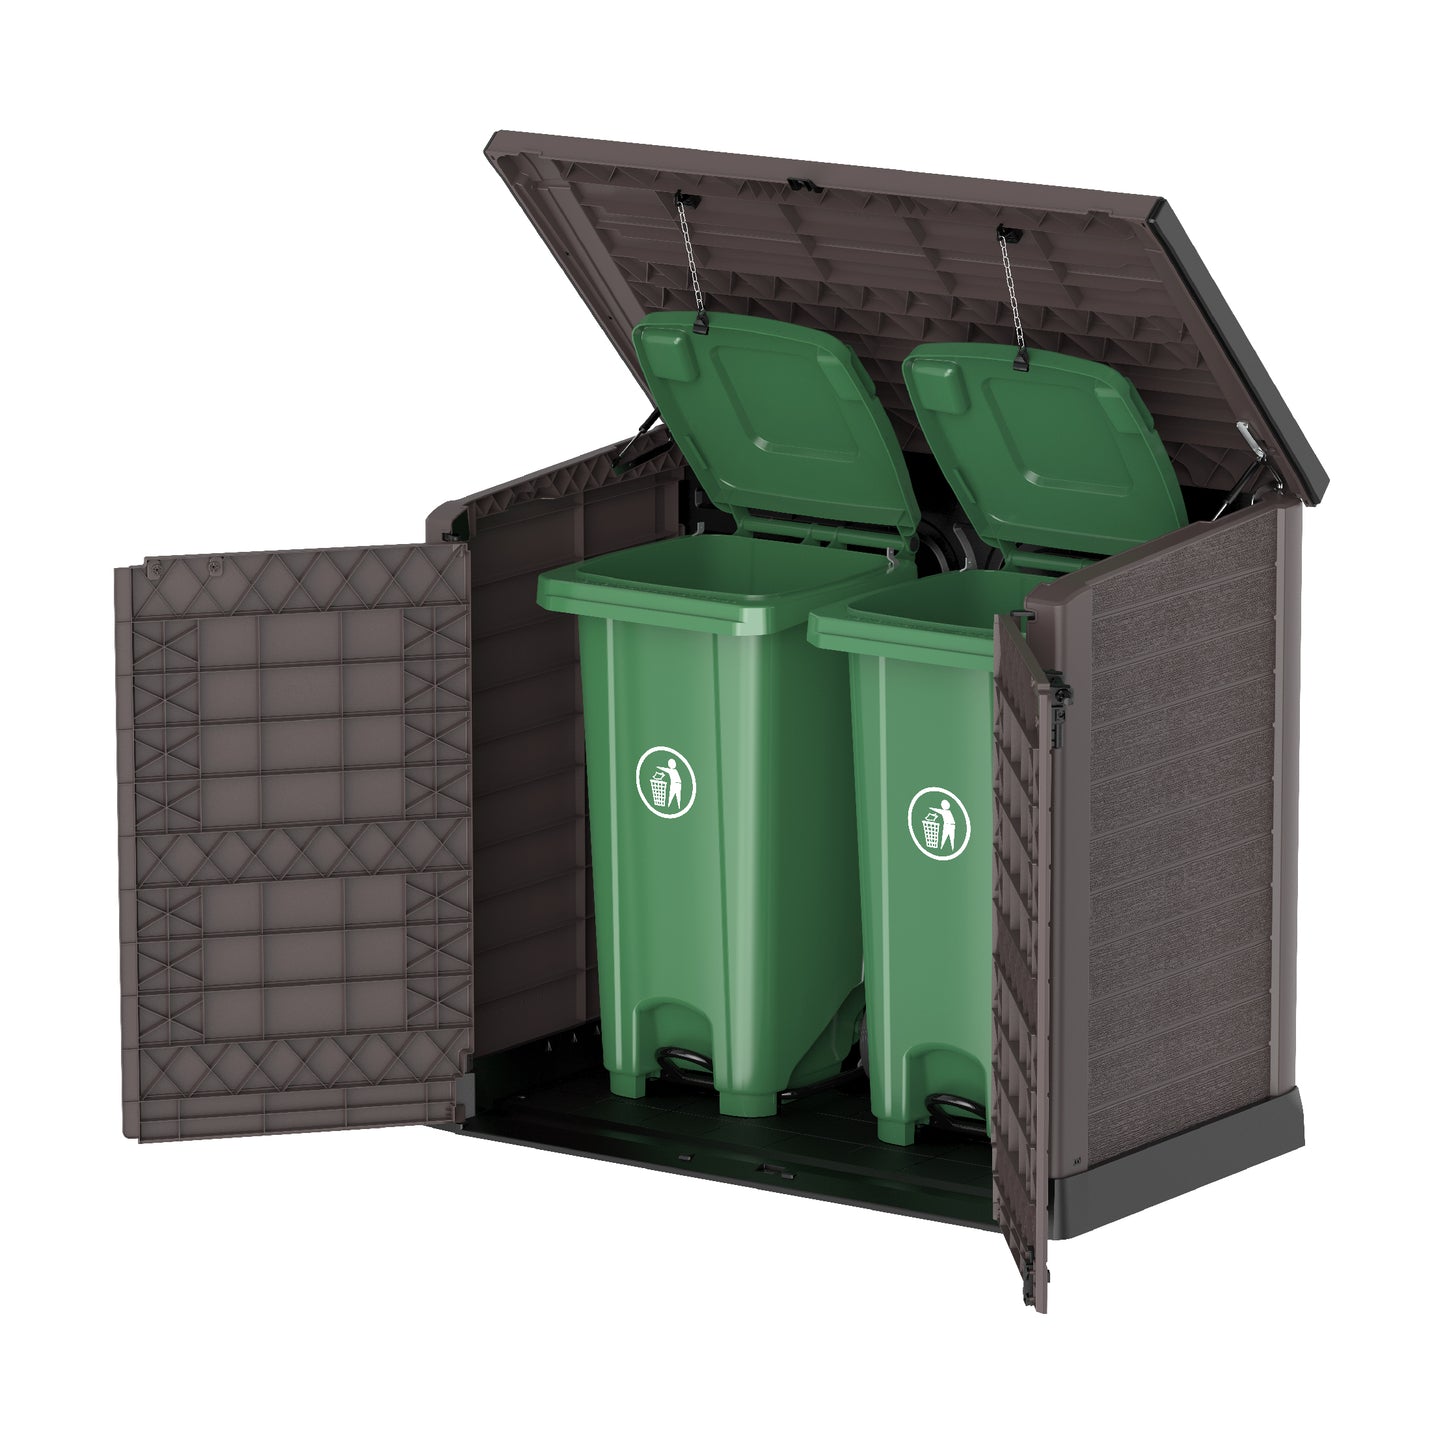  1200L Small Storage Shed +2 Outdoor Waste Bins 240L